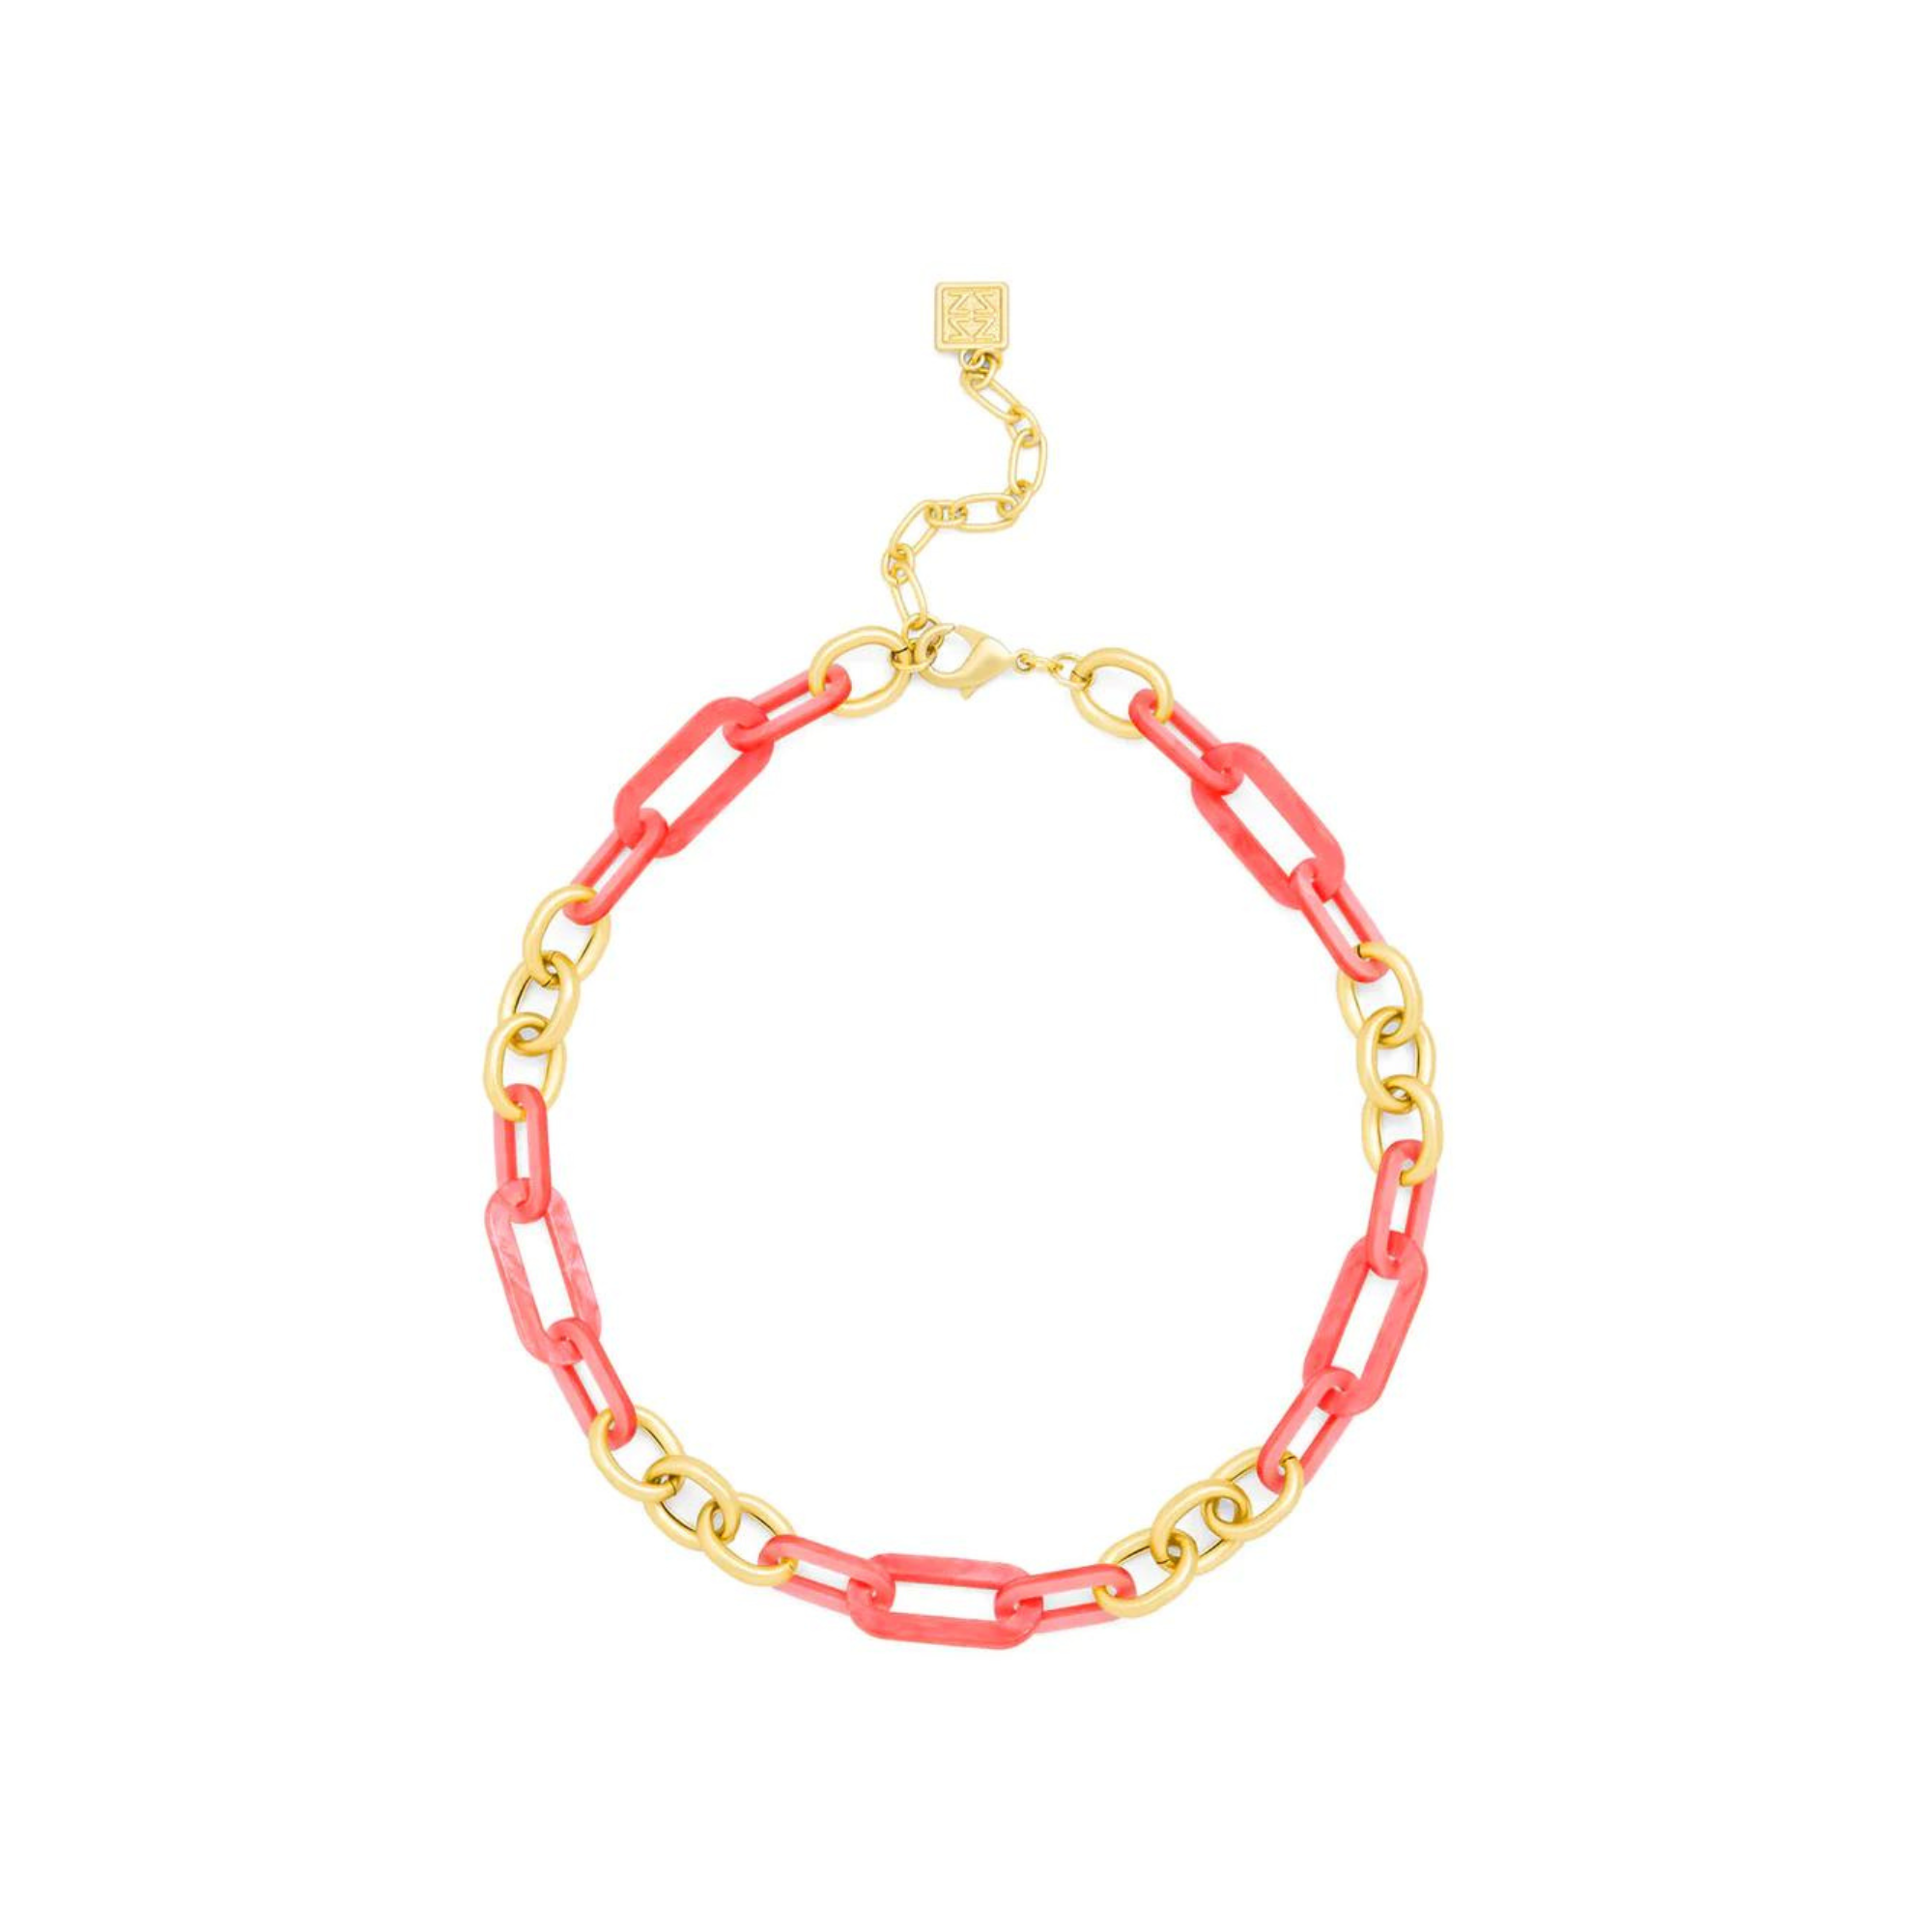 Resin and Gold Collar Link Necklace